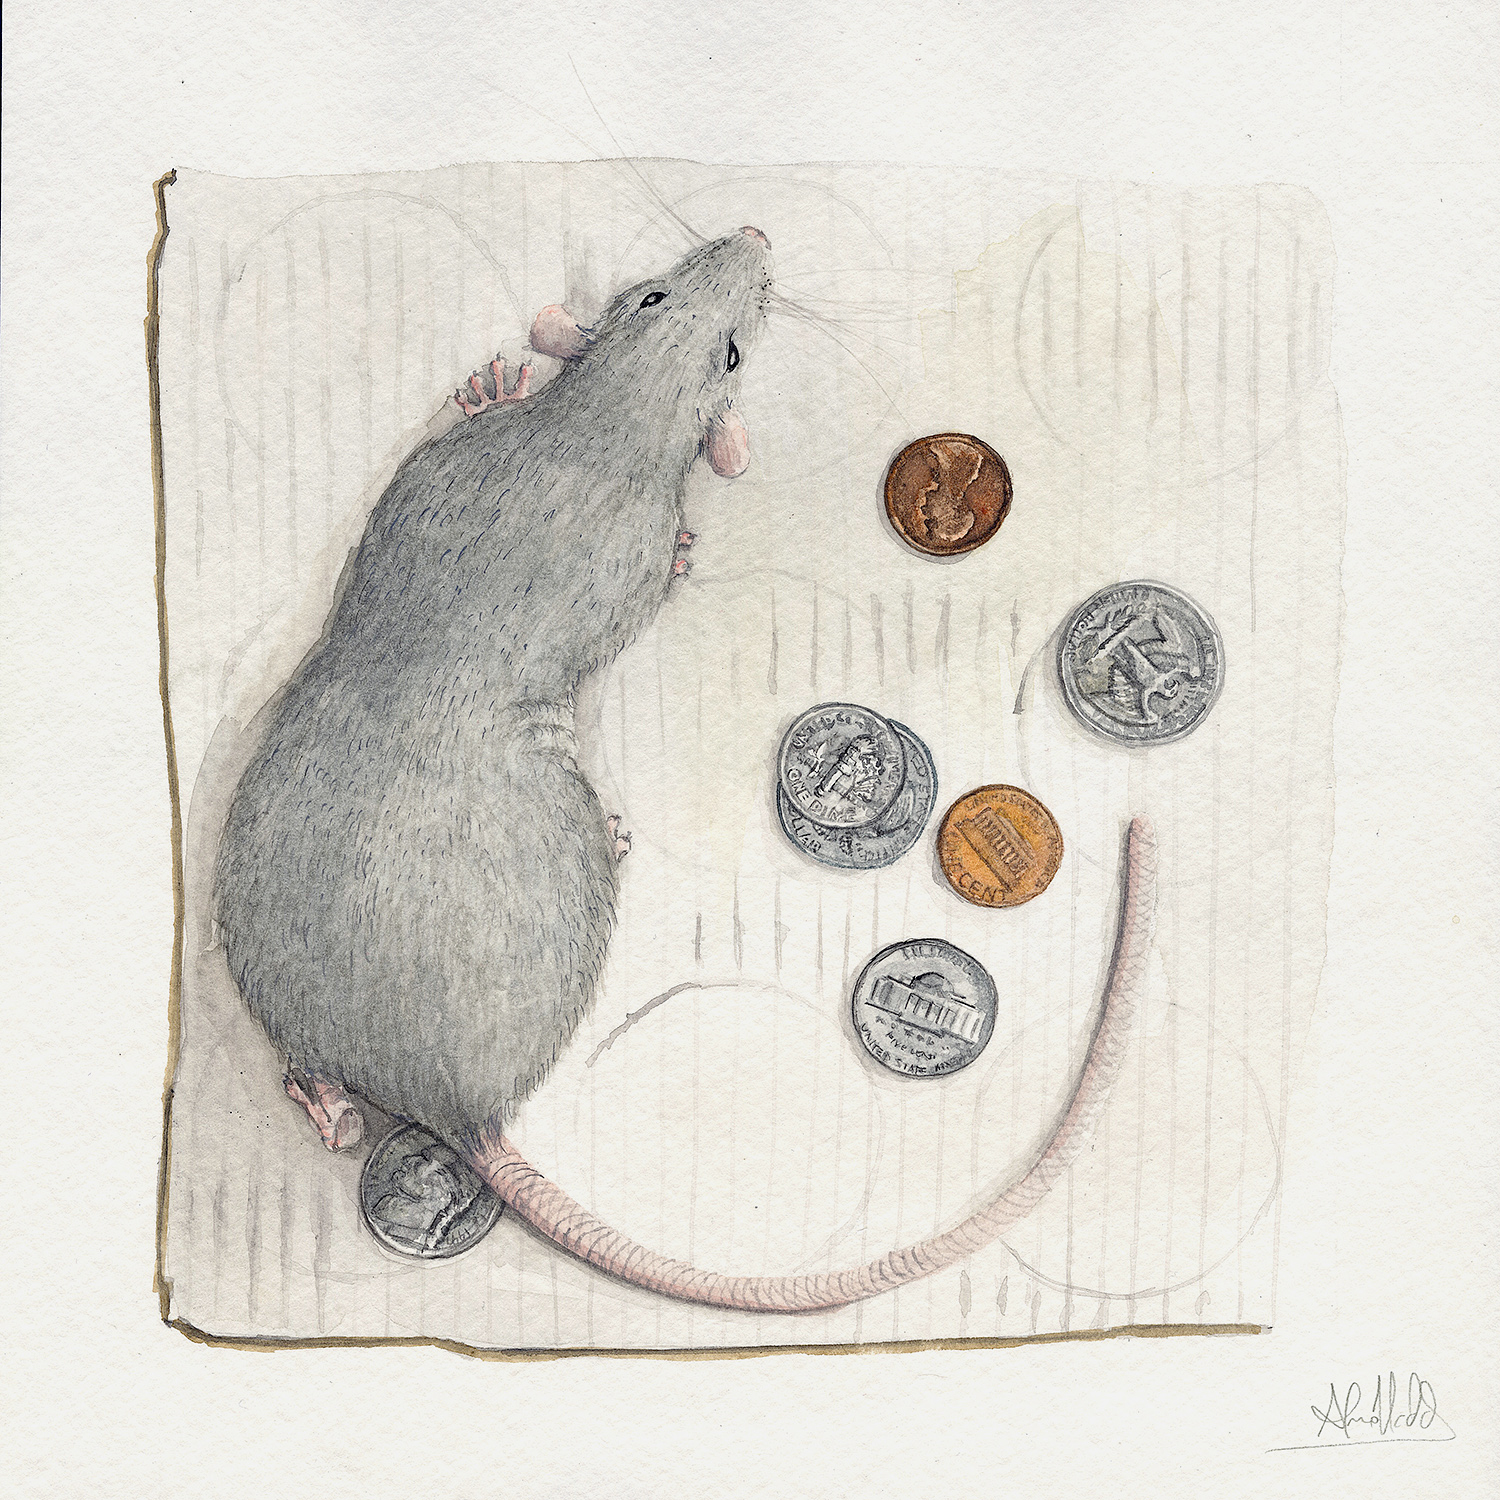 Alvaro Naddeo, Seventy-Two Cents, 2015. Watercolor on paper, 9 x 9 in.